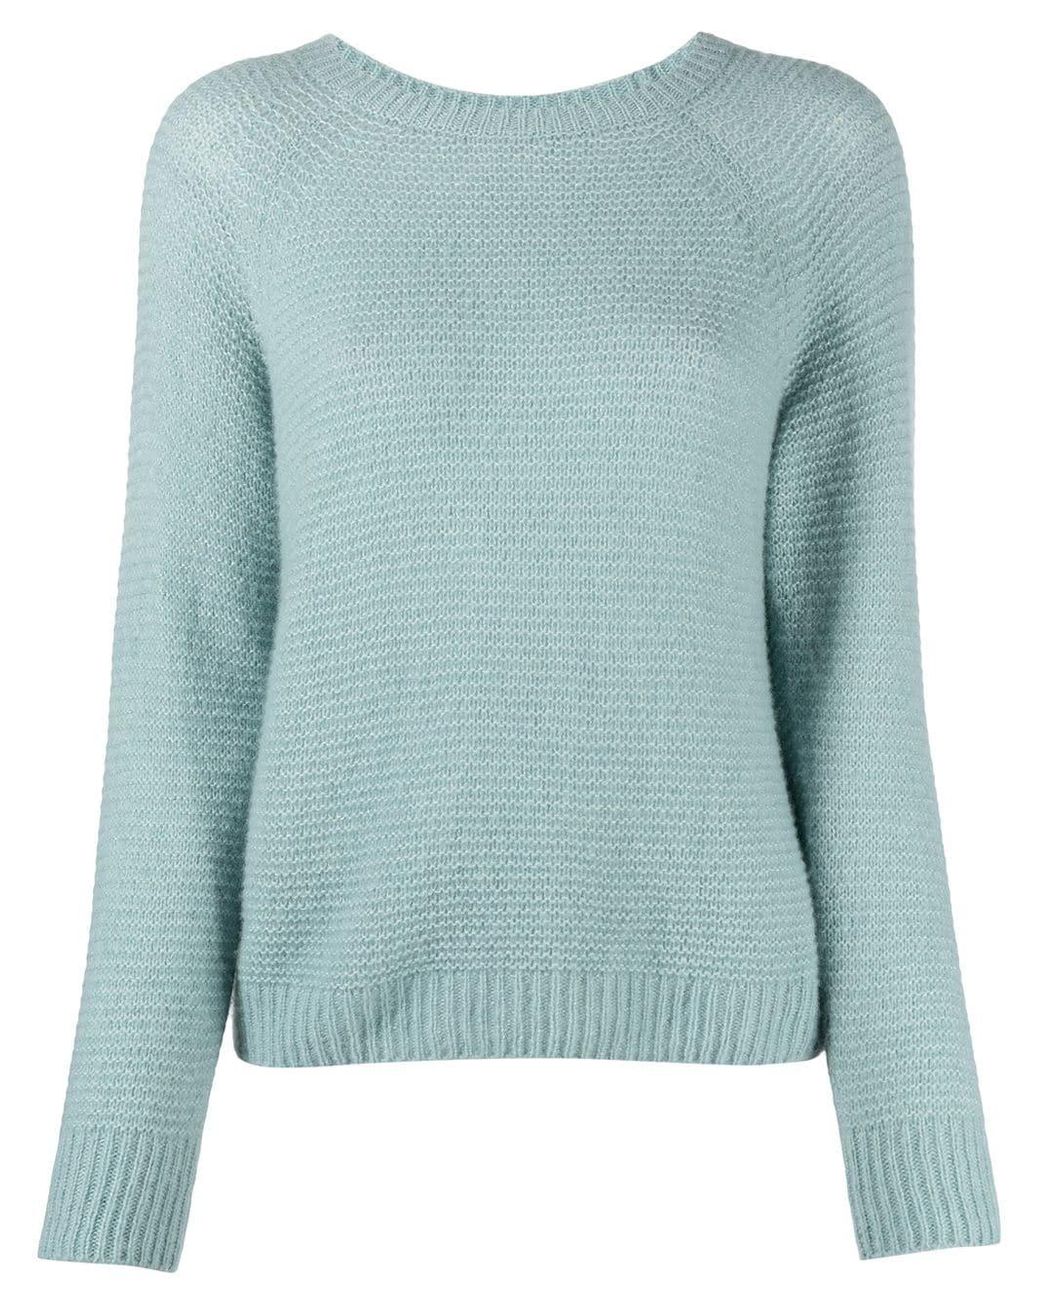 Max Mara Cashmere Sweaters Green in Blue - Save 3% - Lyst